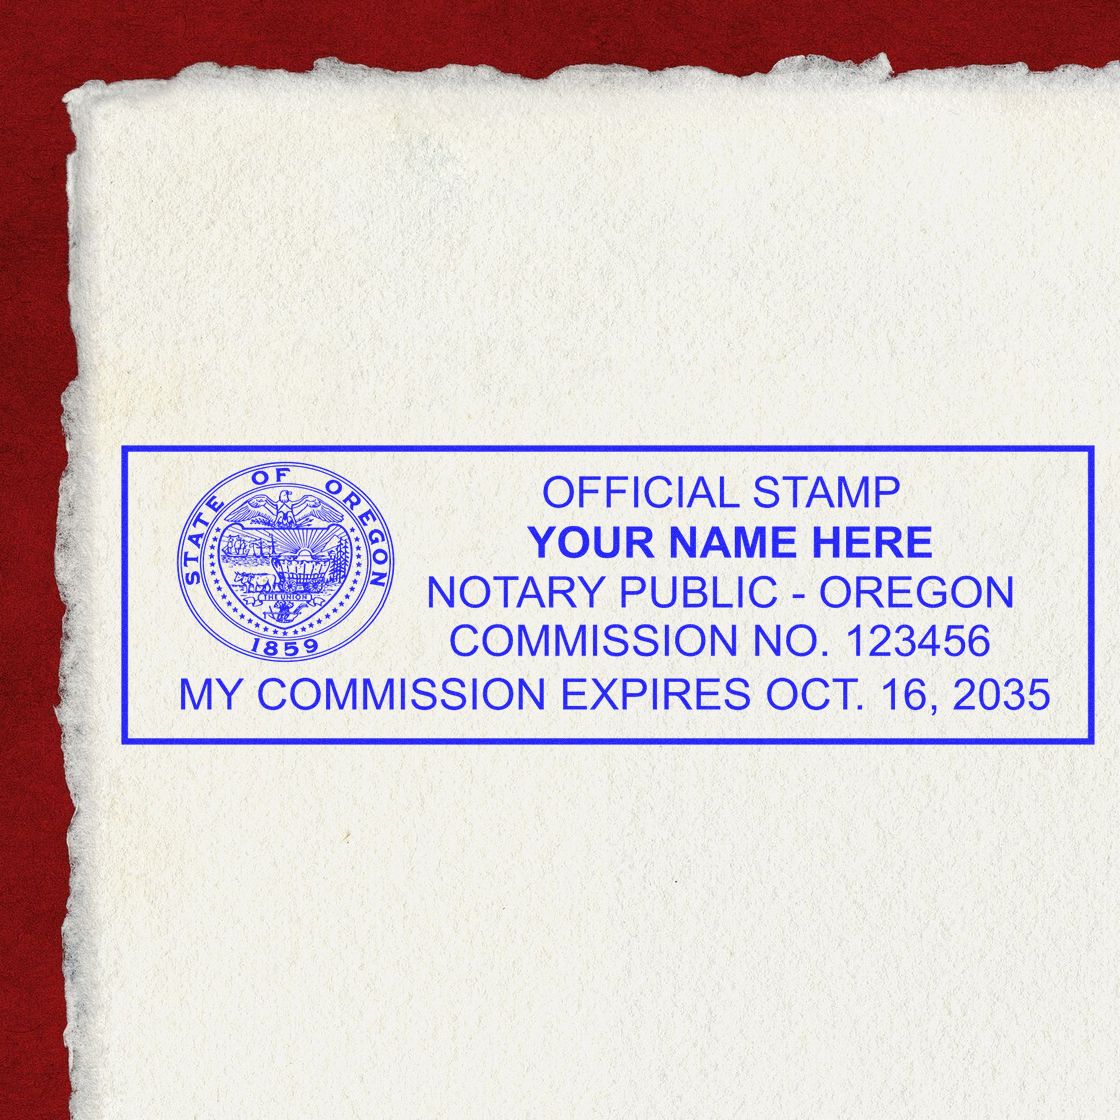 The MaxLight Premium Pre-Inked Oregon Rectangular Notarial Stamp stamp impression comes to life with a crisp, detailed photo on paper - showcasing true professional quality.